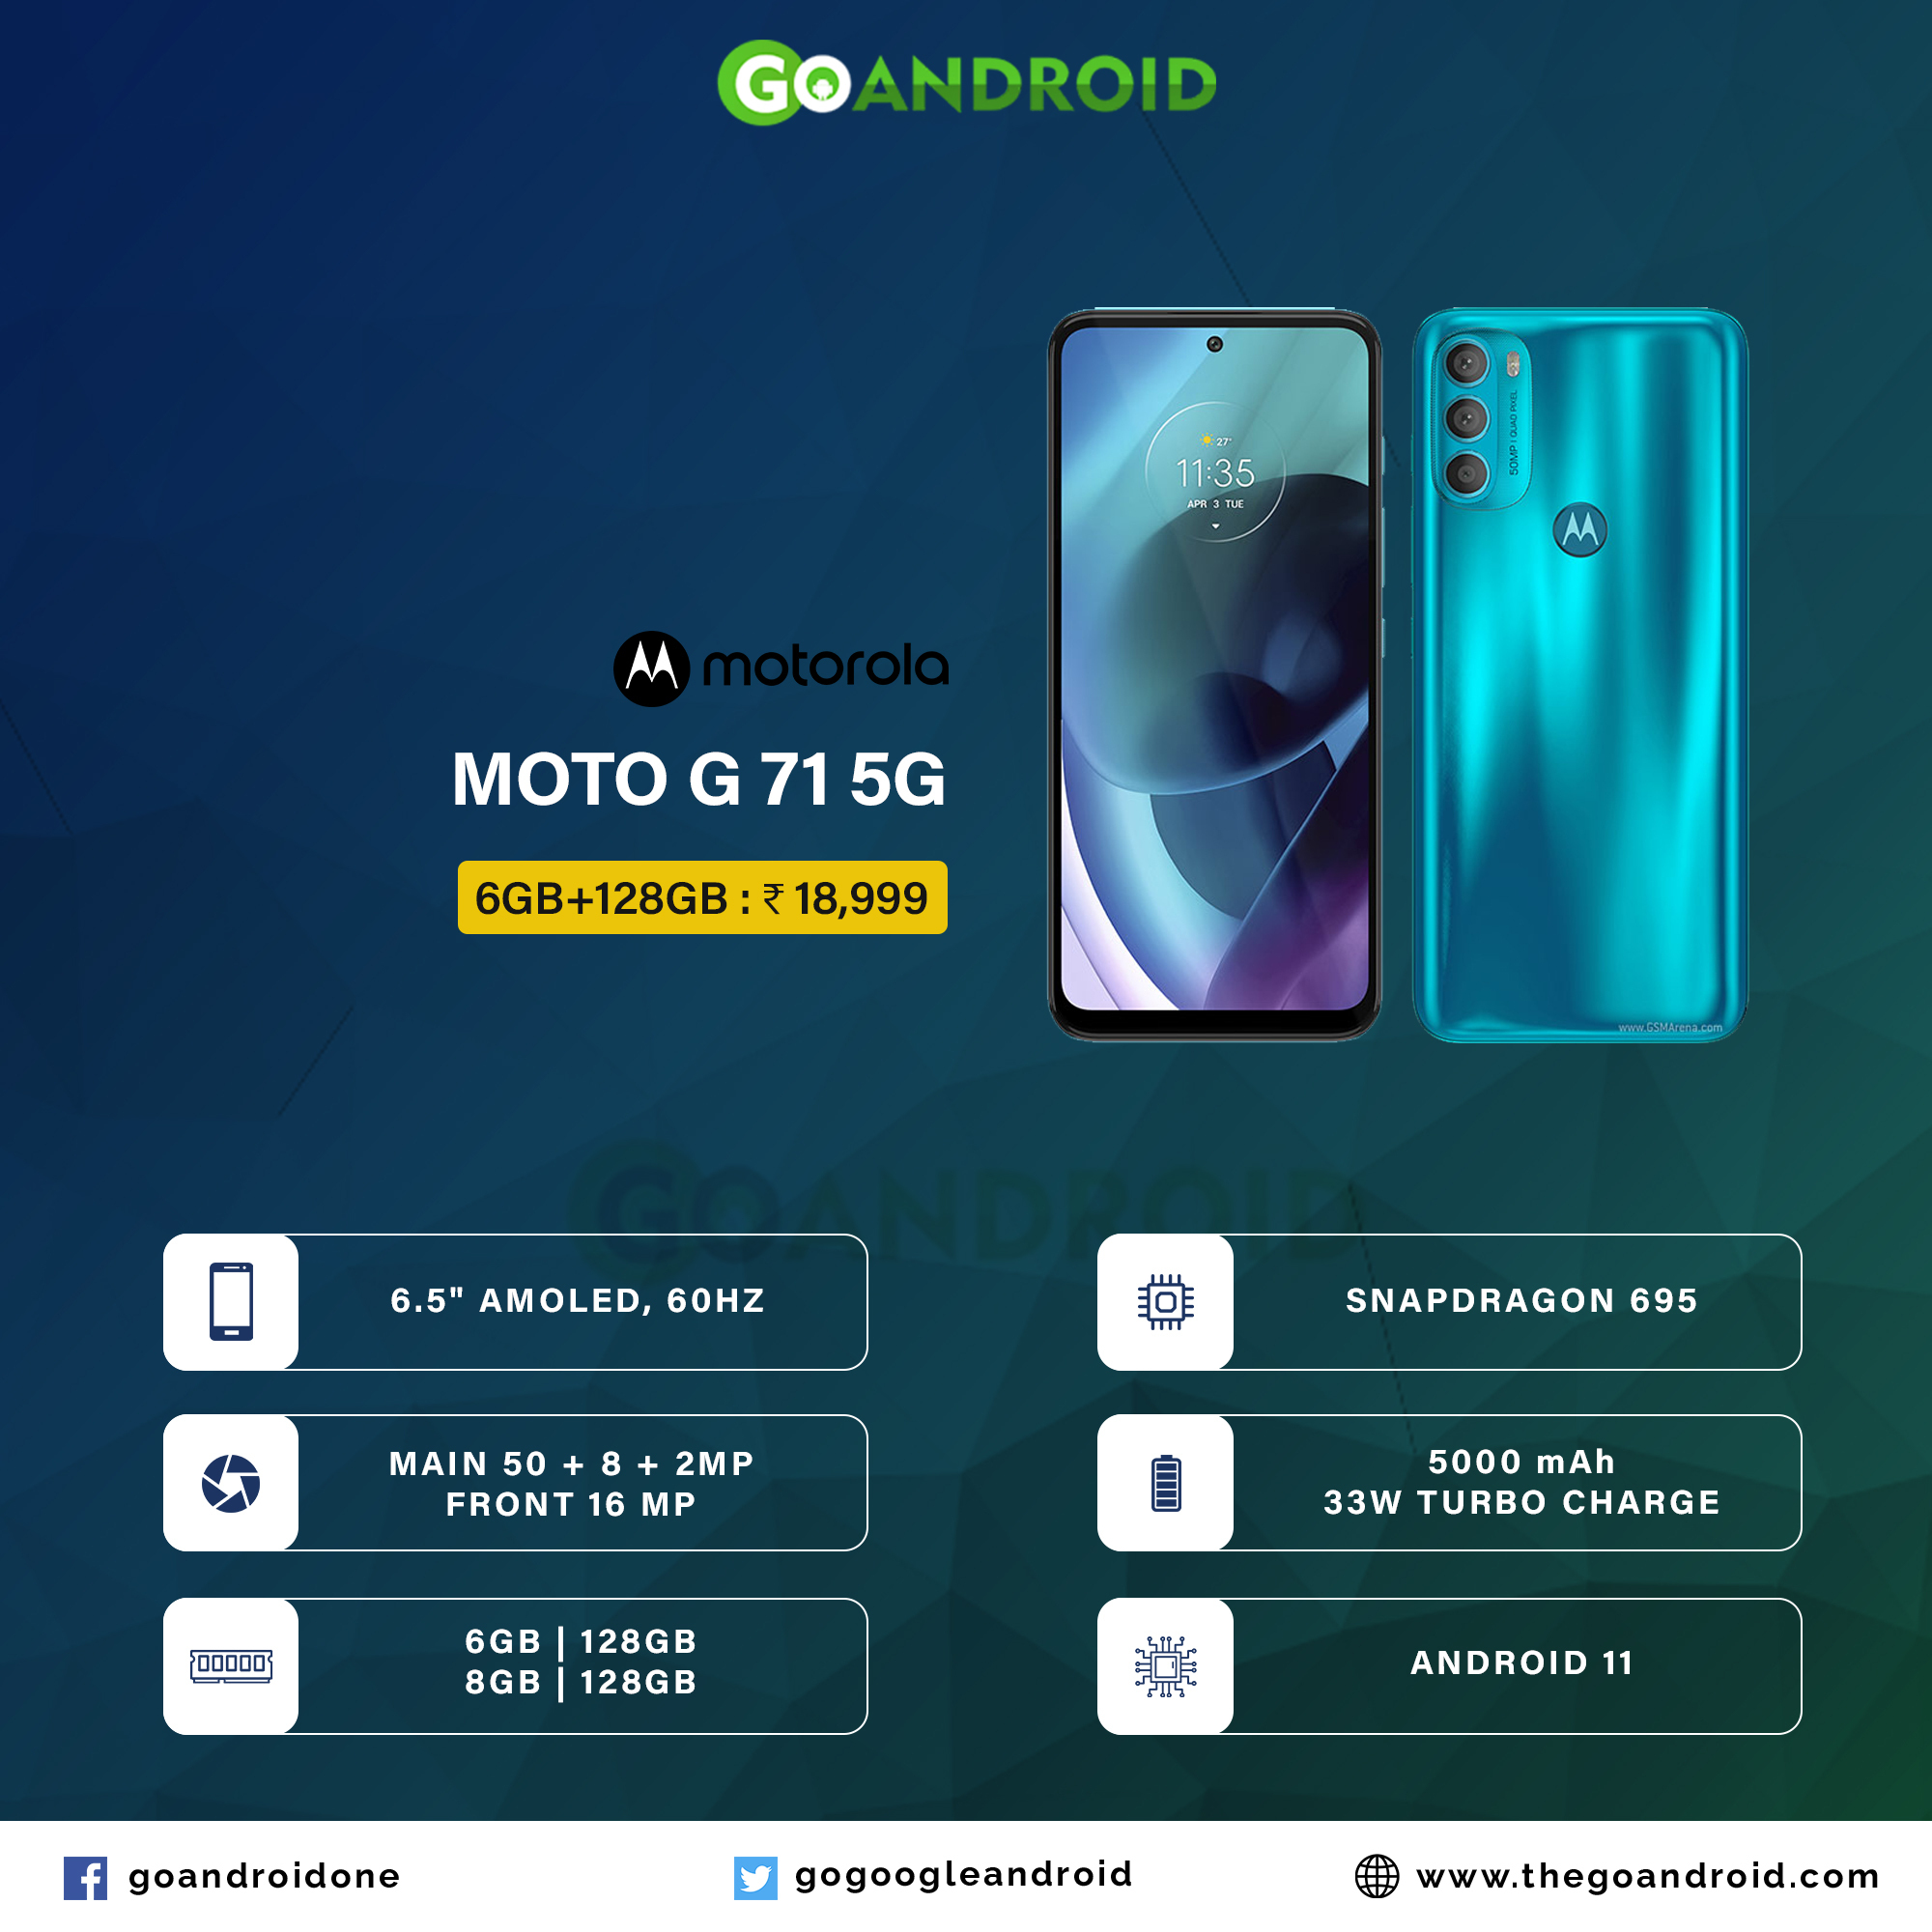 moto g71 5g: first smartphone with snapdragon 695 launched in india